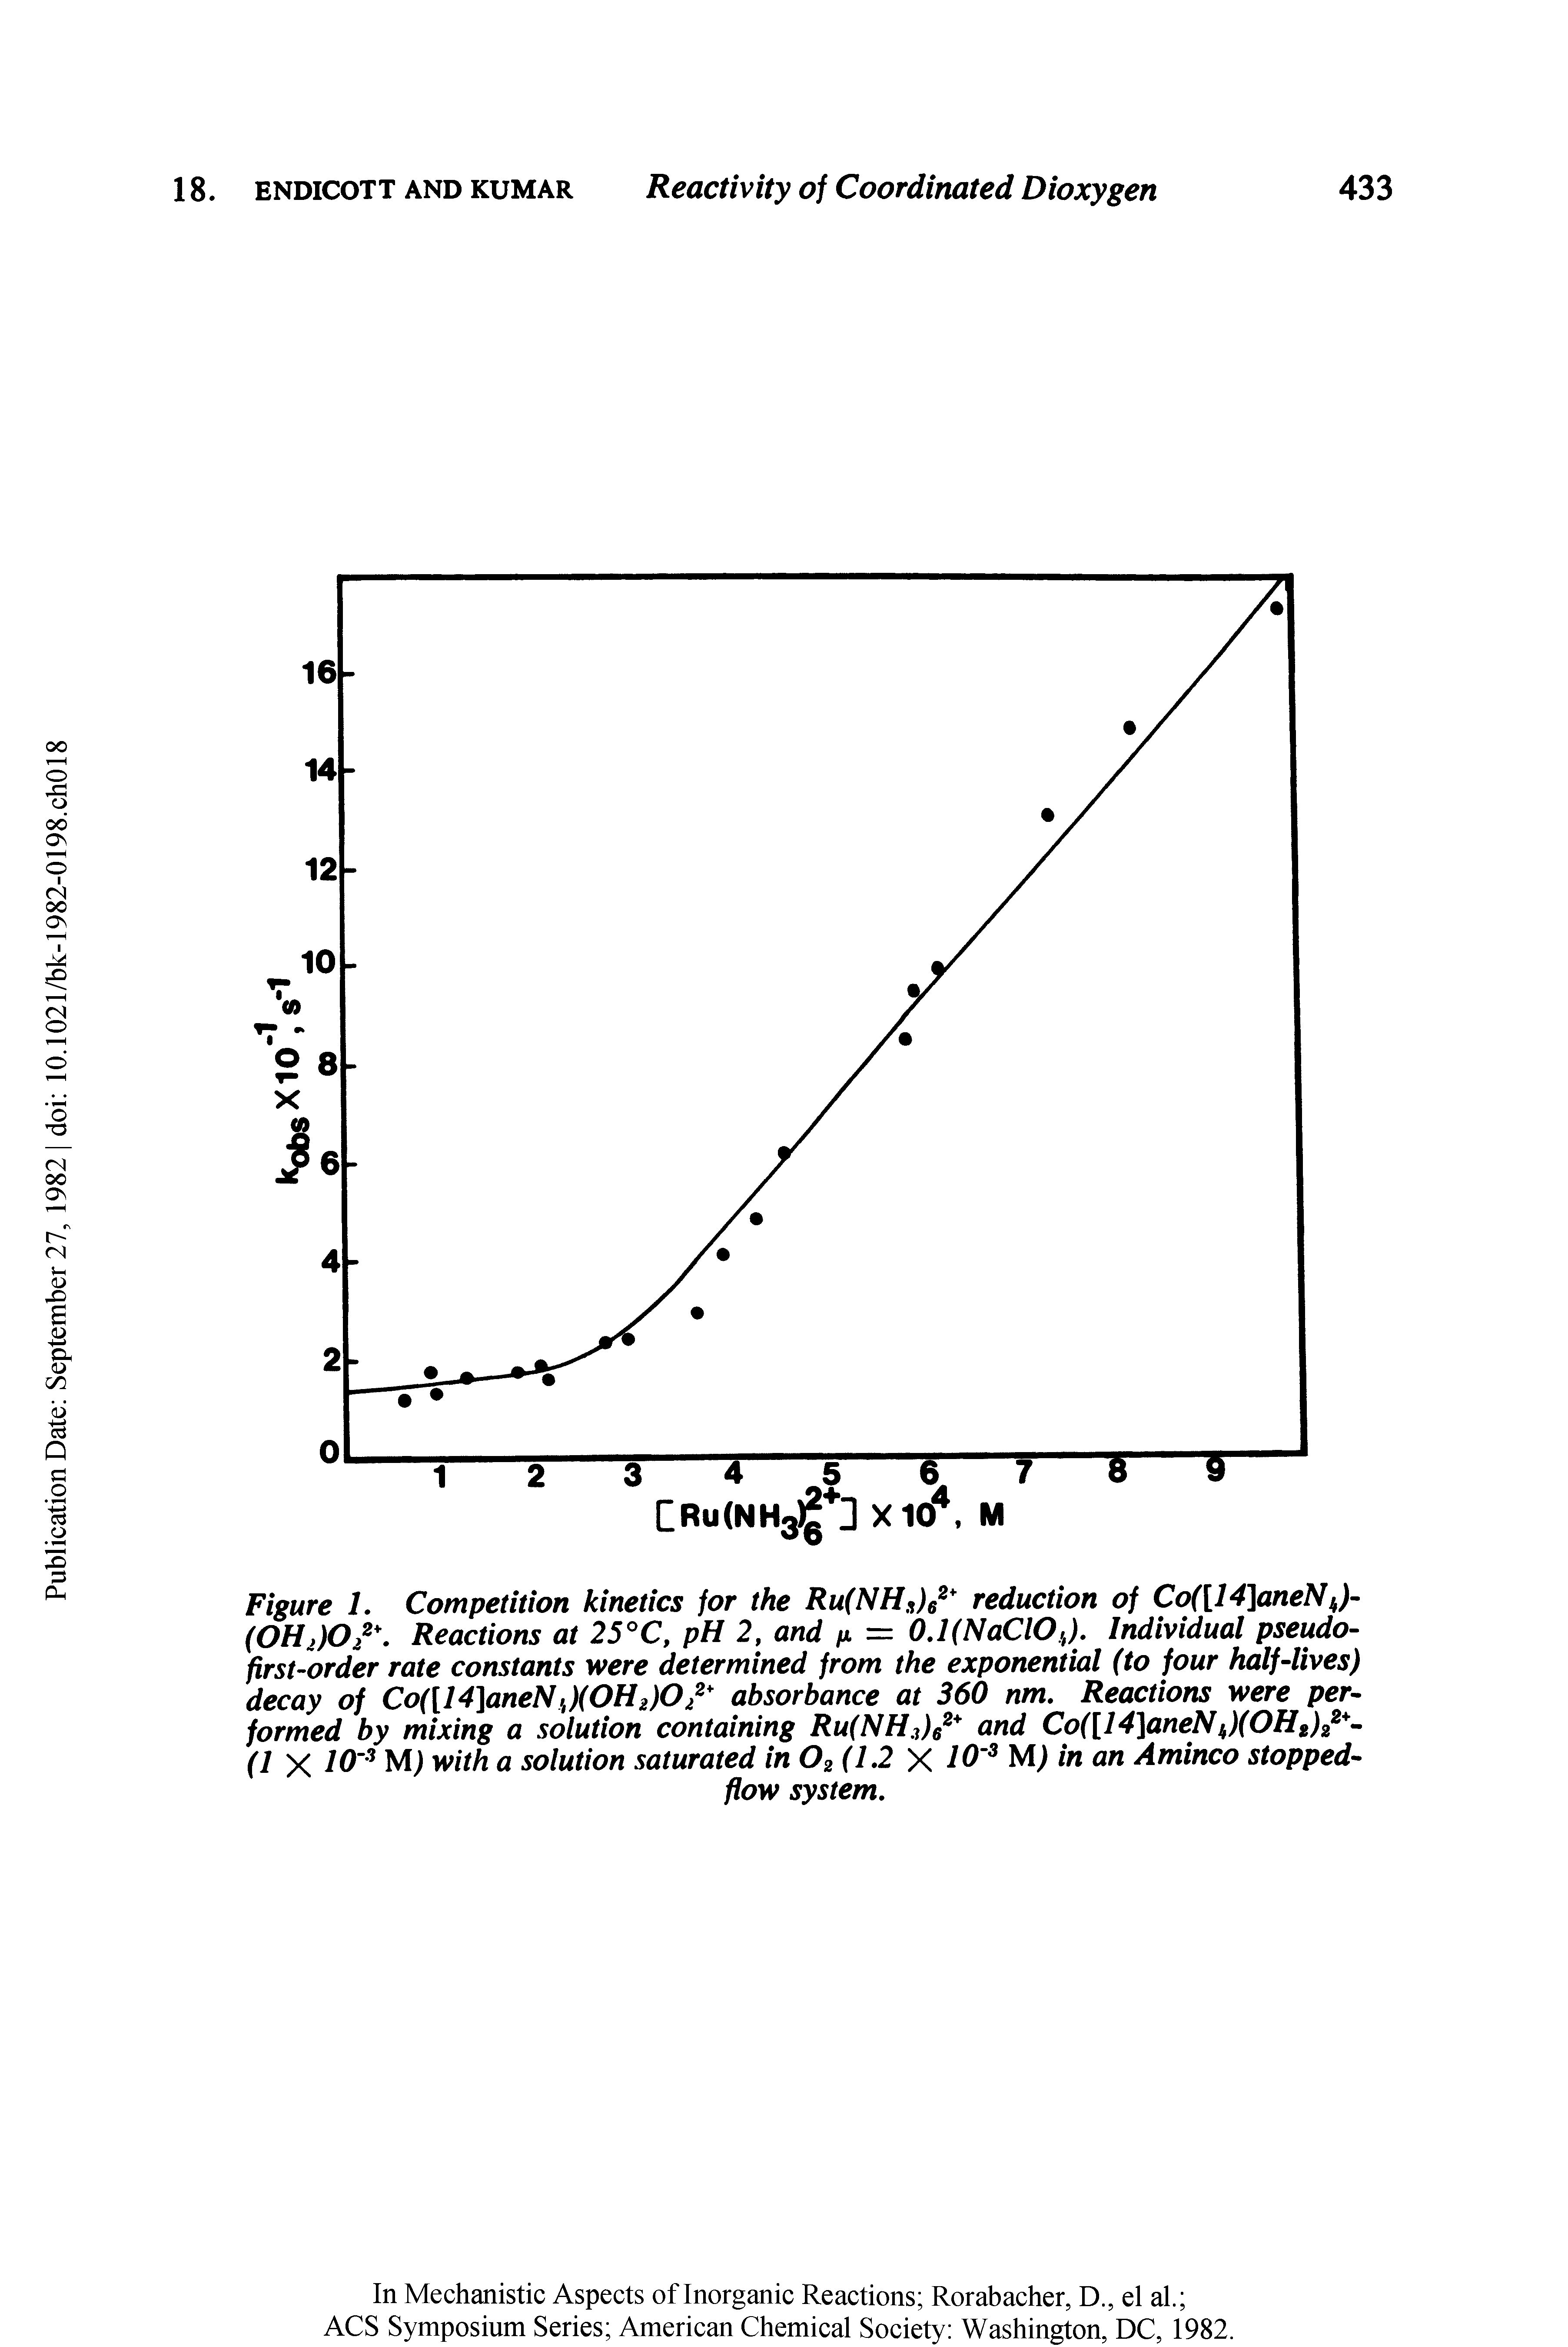 Figure 1. Competition kinetics for the Ru(NH2)62y reduction of Co([14 aneNk)-(0H,)0 Reactions at 25°C, pH 2, and n = 0.1(NaClO,). Individual pseudo-first-order rate constants were determined from the exponential (to four half-lives) decay of Co([14]aneN,)(OH2)022 absorbance at 360 nm. Reactions were performed by mixing a solution containing Ru(NH2)62 and Co([14]aneNh)(OHt) -(1 X I 3 M) with a solution saturated in 02(1.2 X 10 3 in an Aminco stopped-...